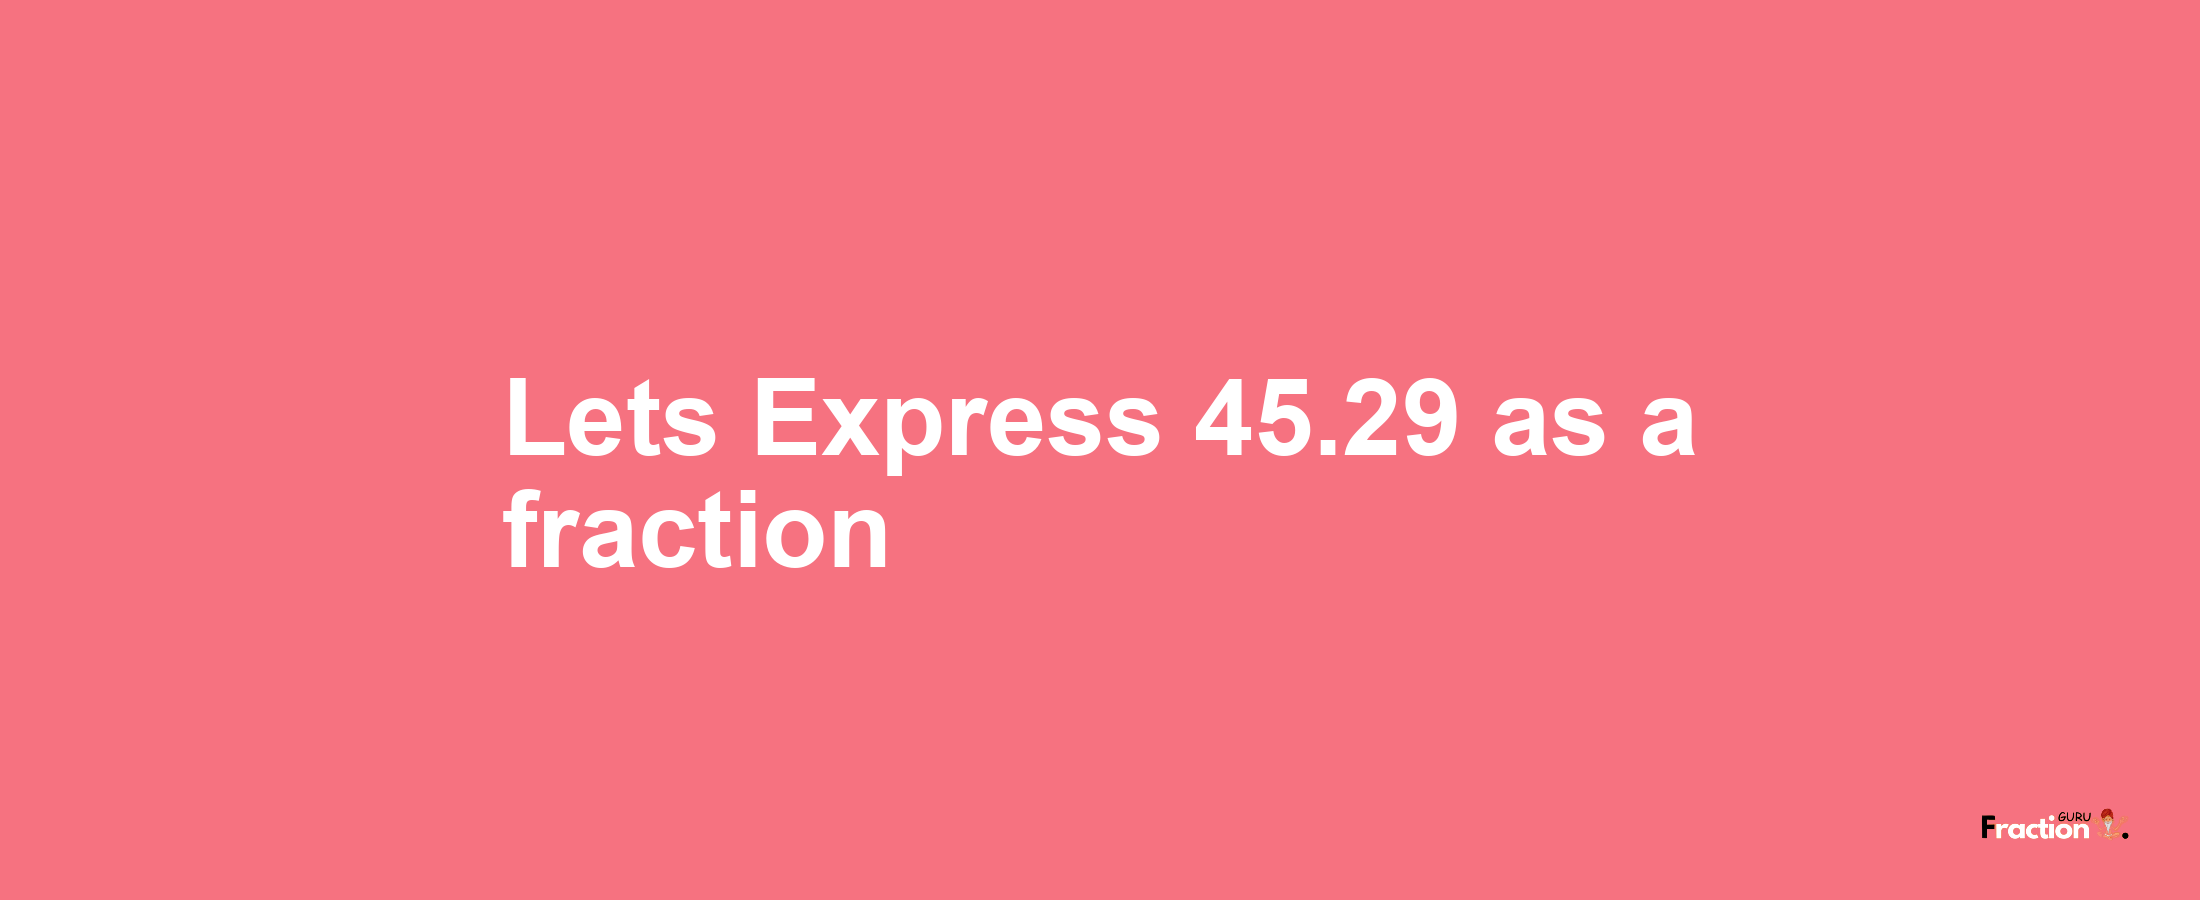 Lets Express 45.29 as afraction